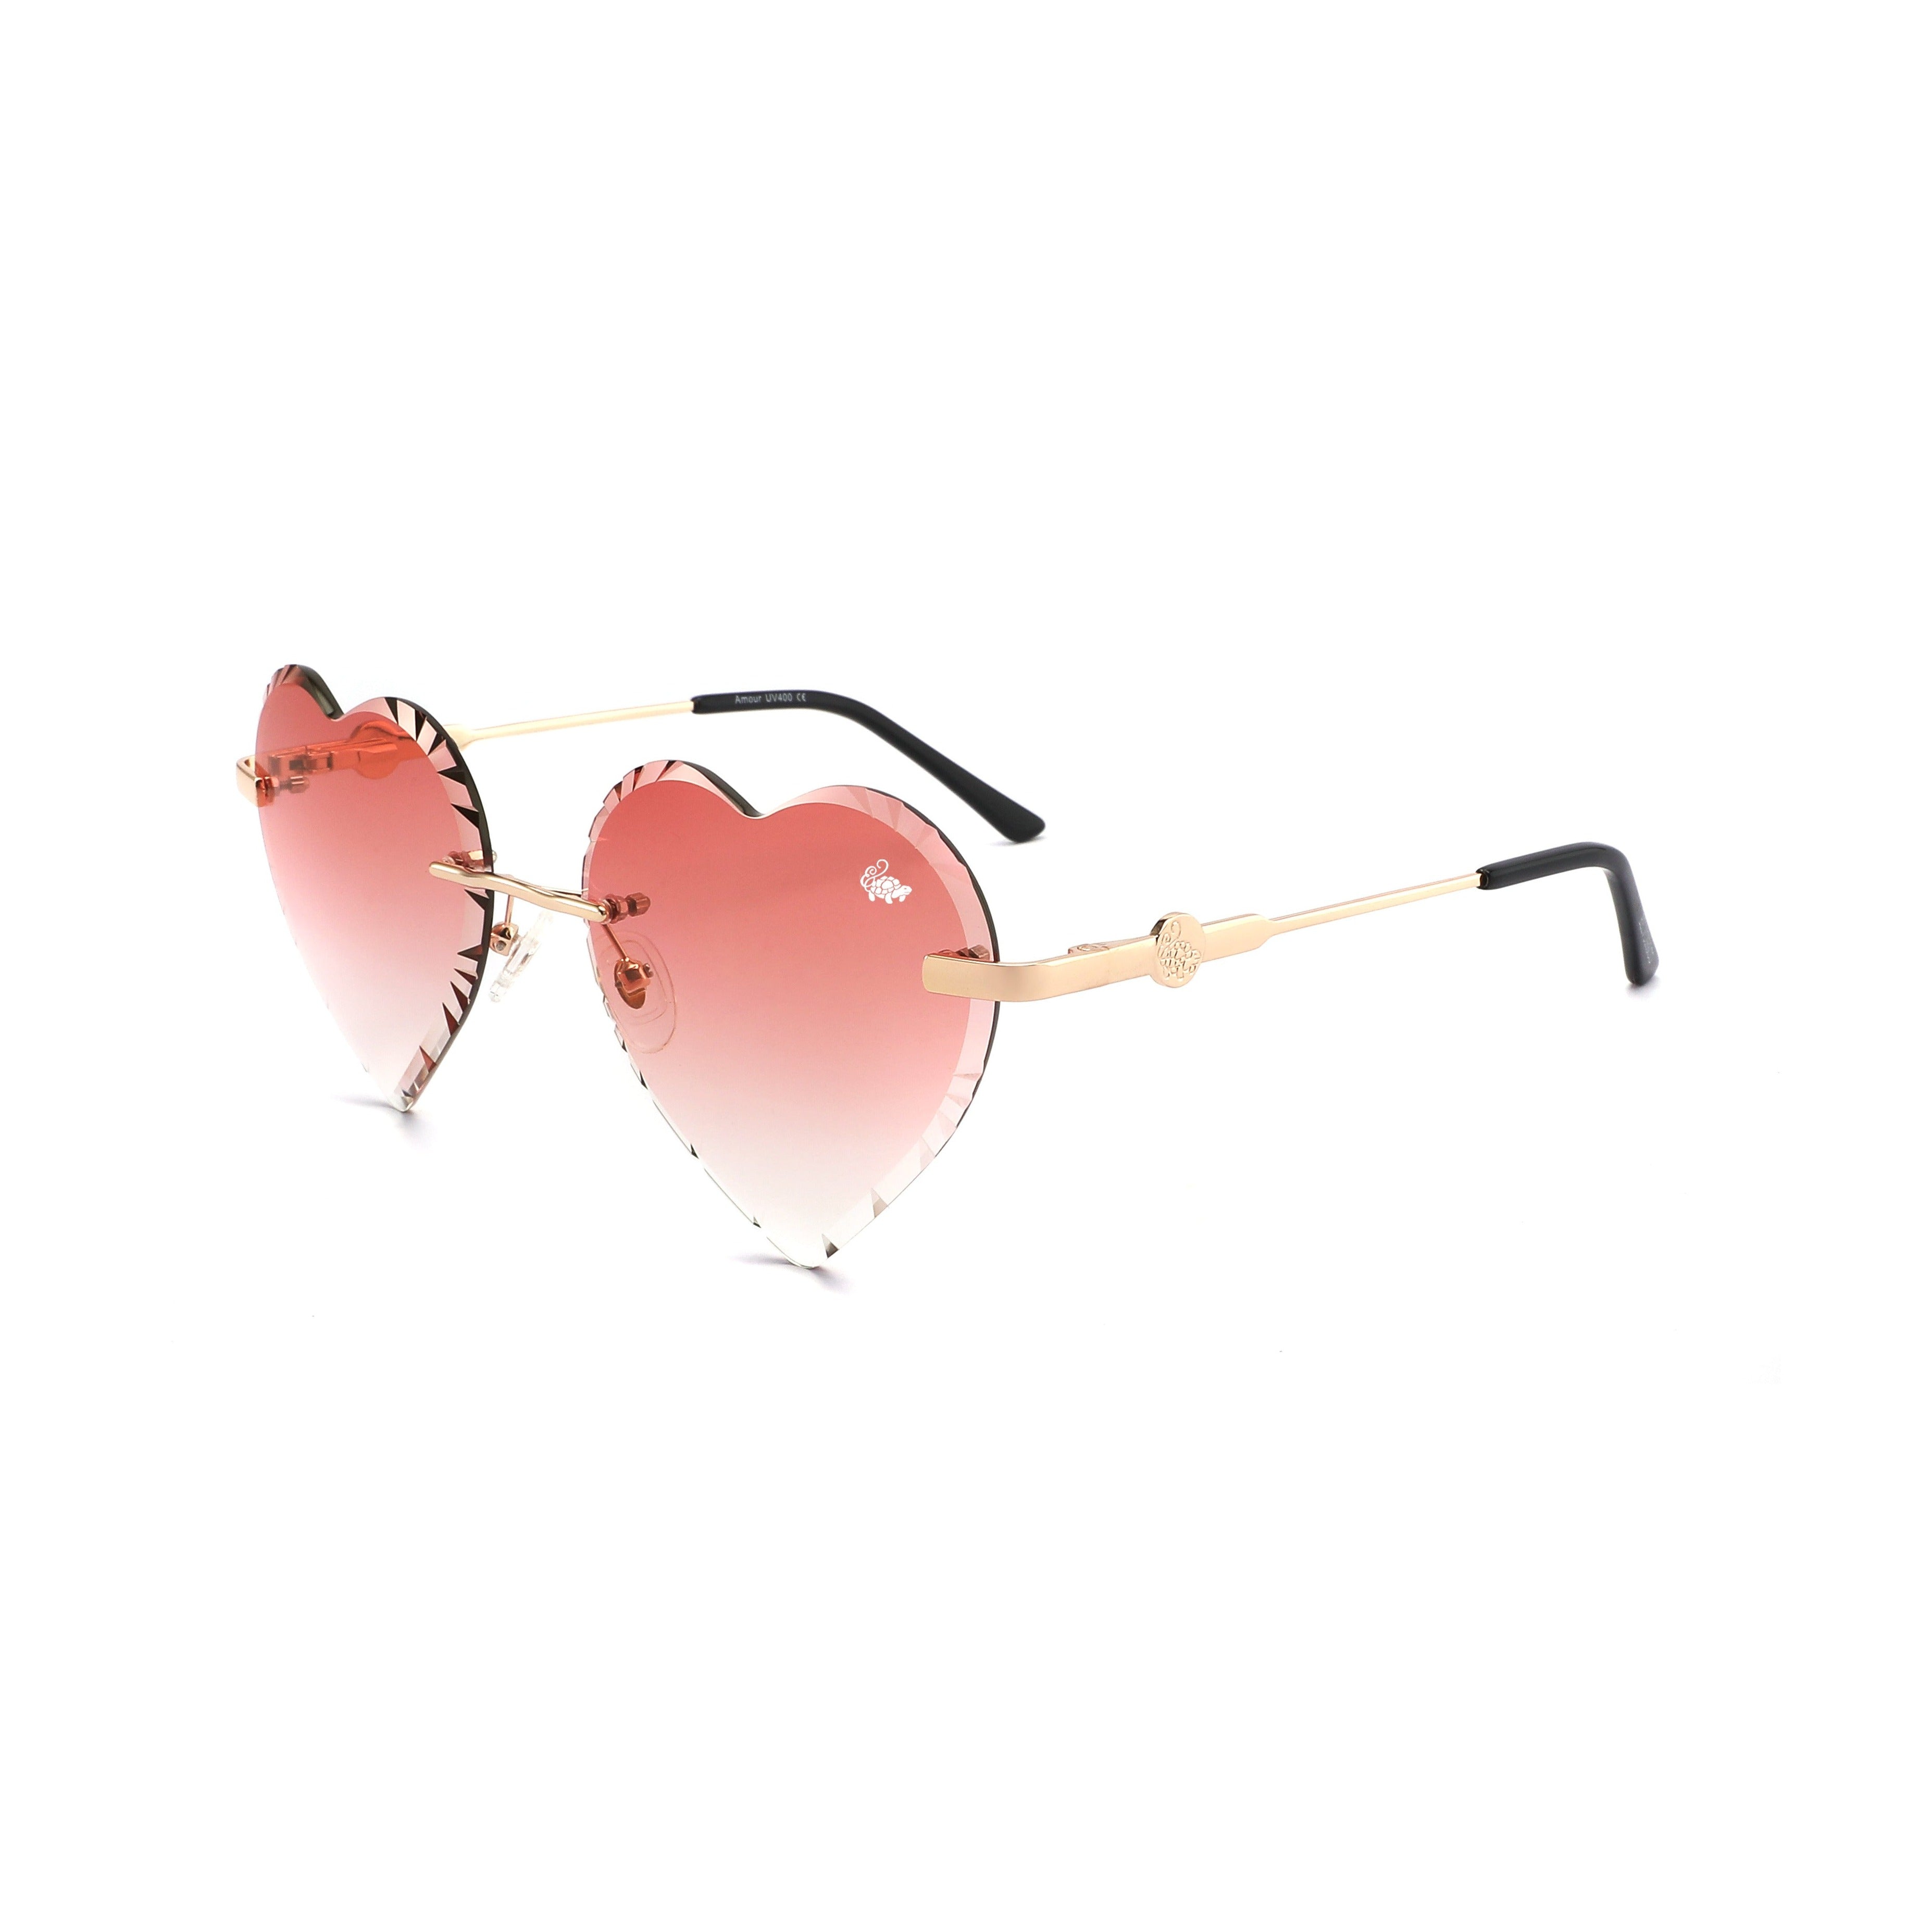 Amour Burnt Red Sunglasses - Gold Frame - UV Protection - Belvoir&Co